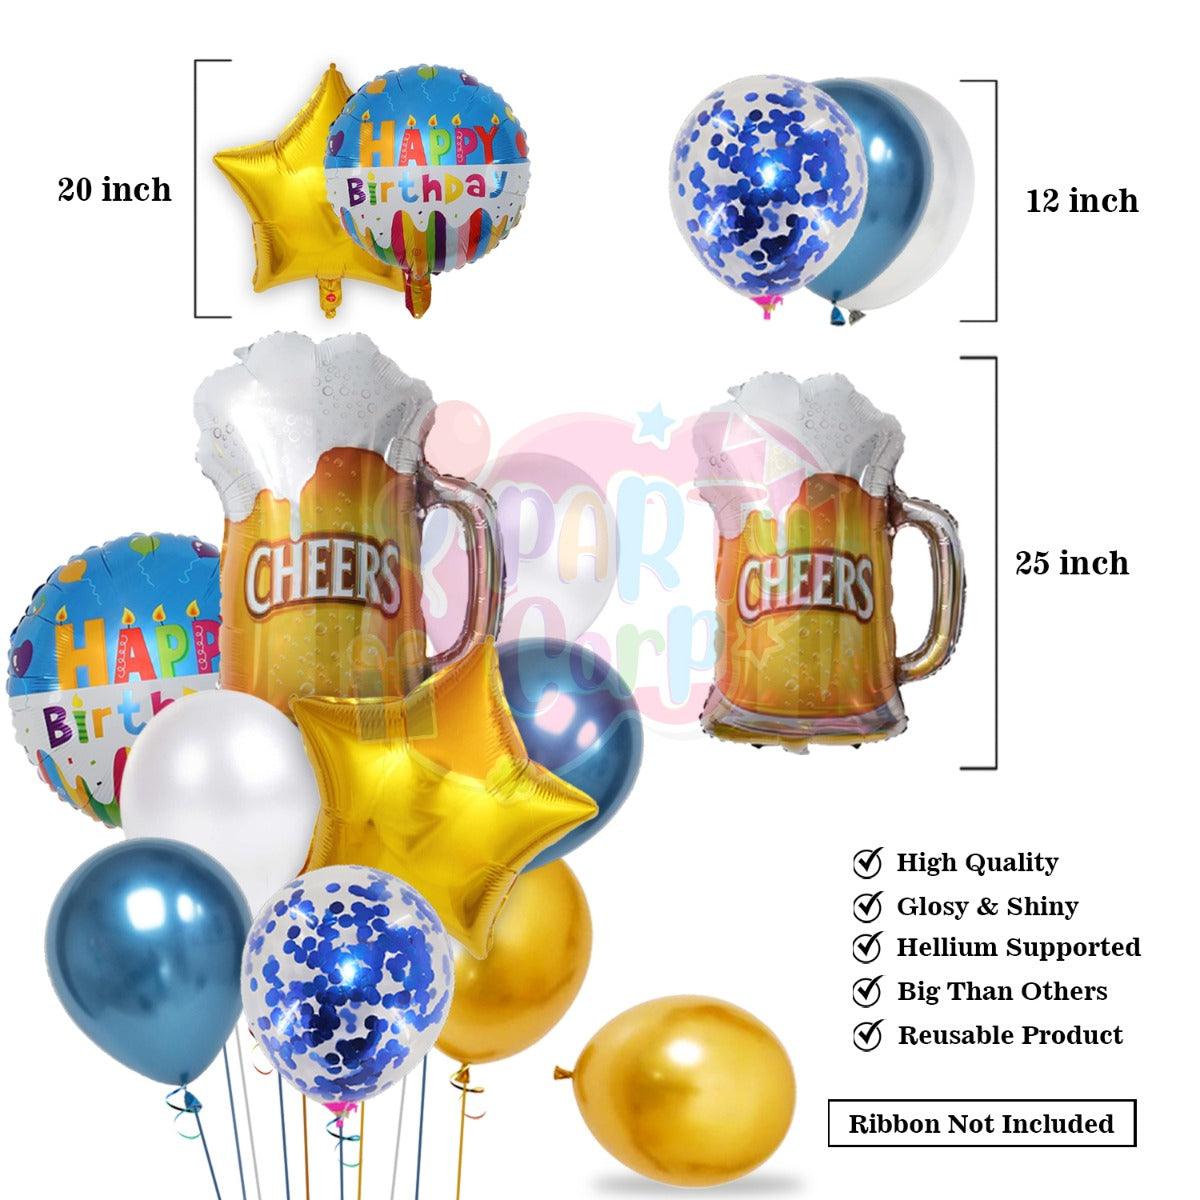 PartyCorp Happy Birthday Decoration Kit Combo 38 Pcs - Blue & White Chrome & Confetti Balloons, White & Gold Happy Birthday Banner, Blue Curtain, Cheers Beer Mug Foil Balloons